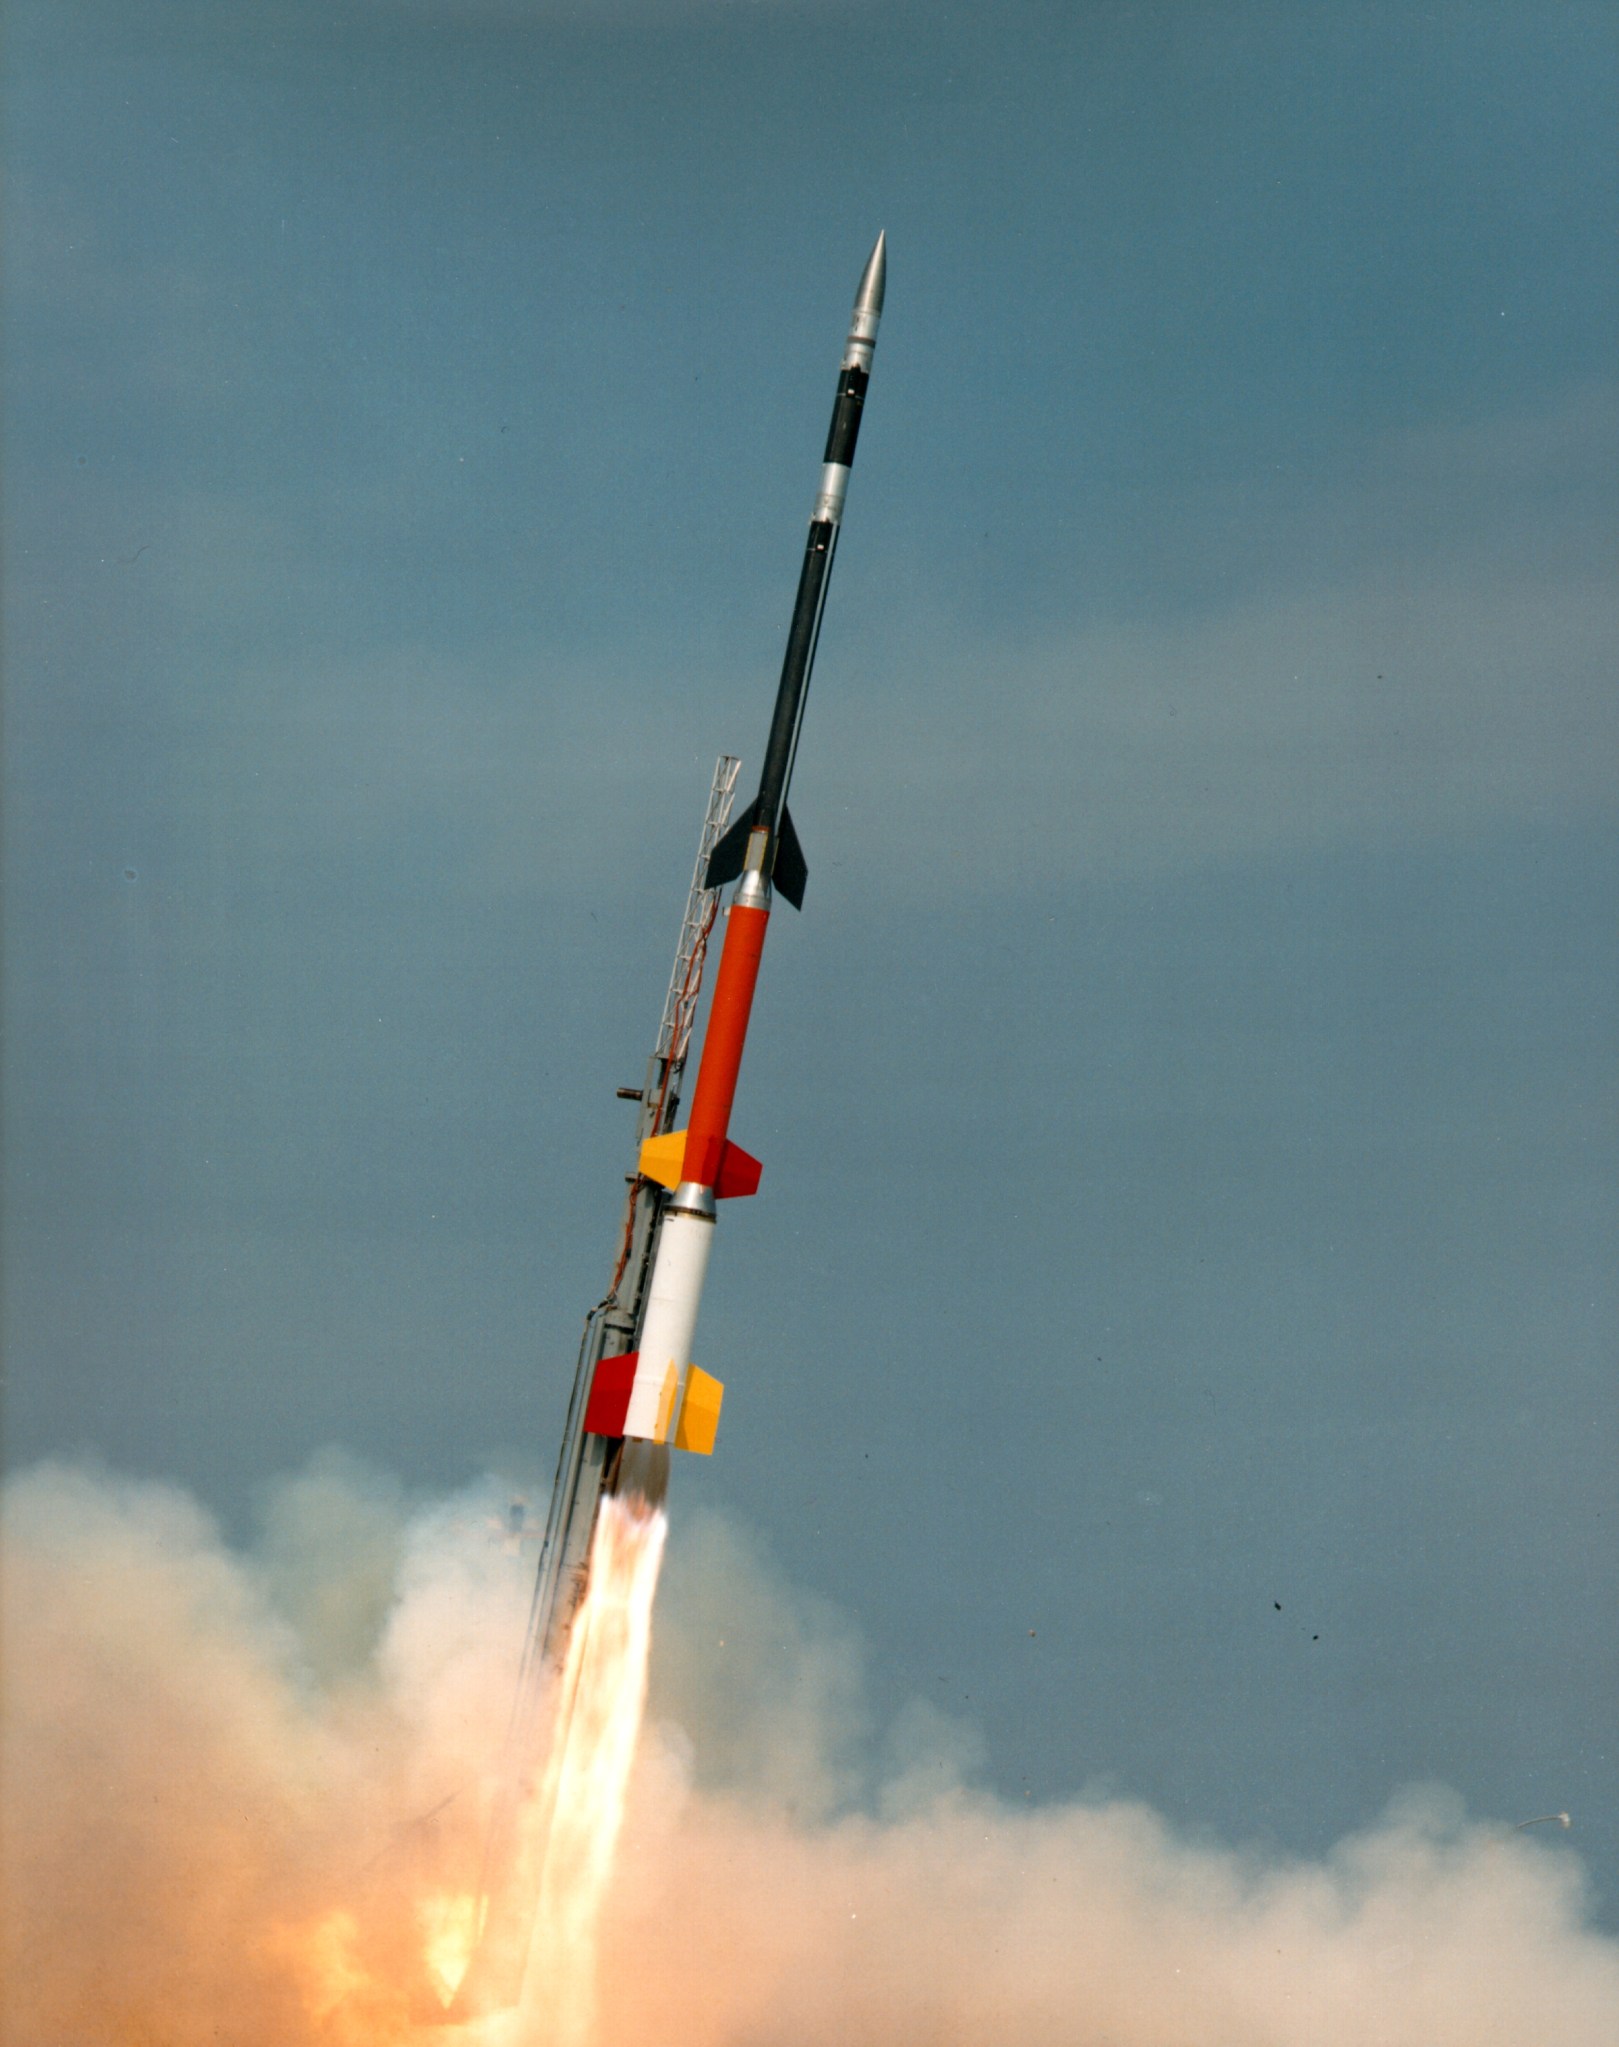 A sounding rocket launching from a launch pad with a plume of smoke forming underneath.